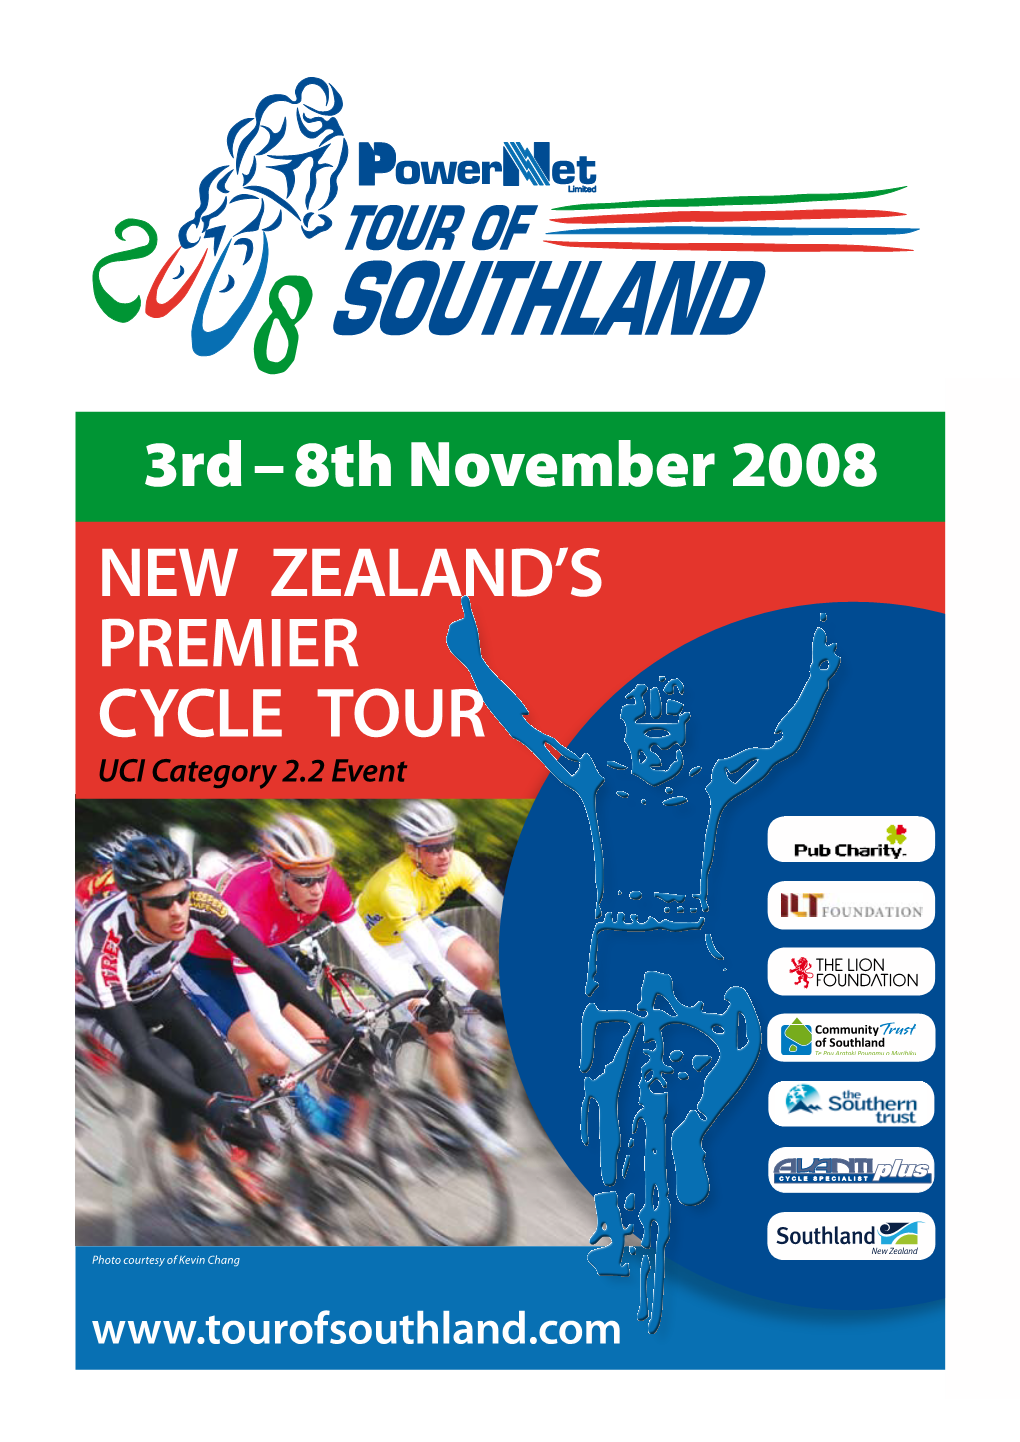 Raboplus.Co.Nz and Complete the Online Account Opening Form Entering the Promotional Code “TOS2008”